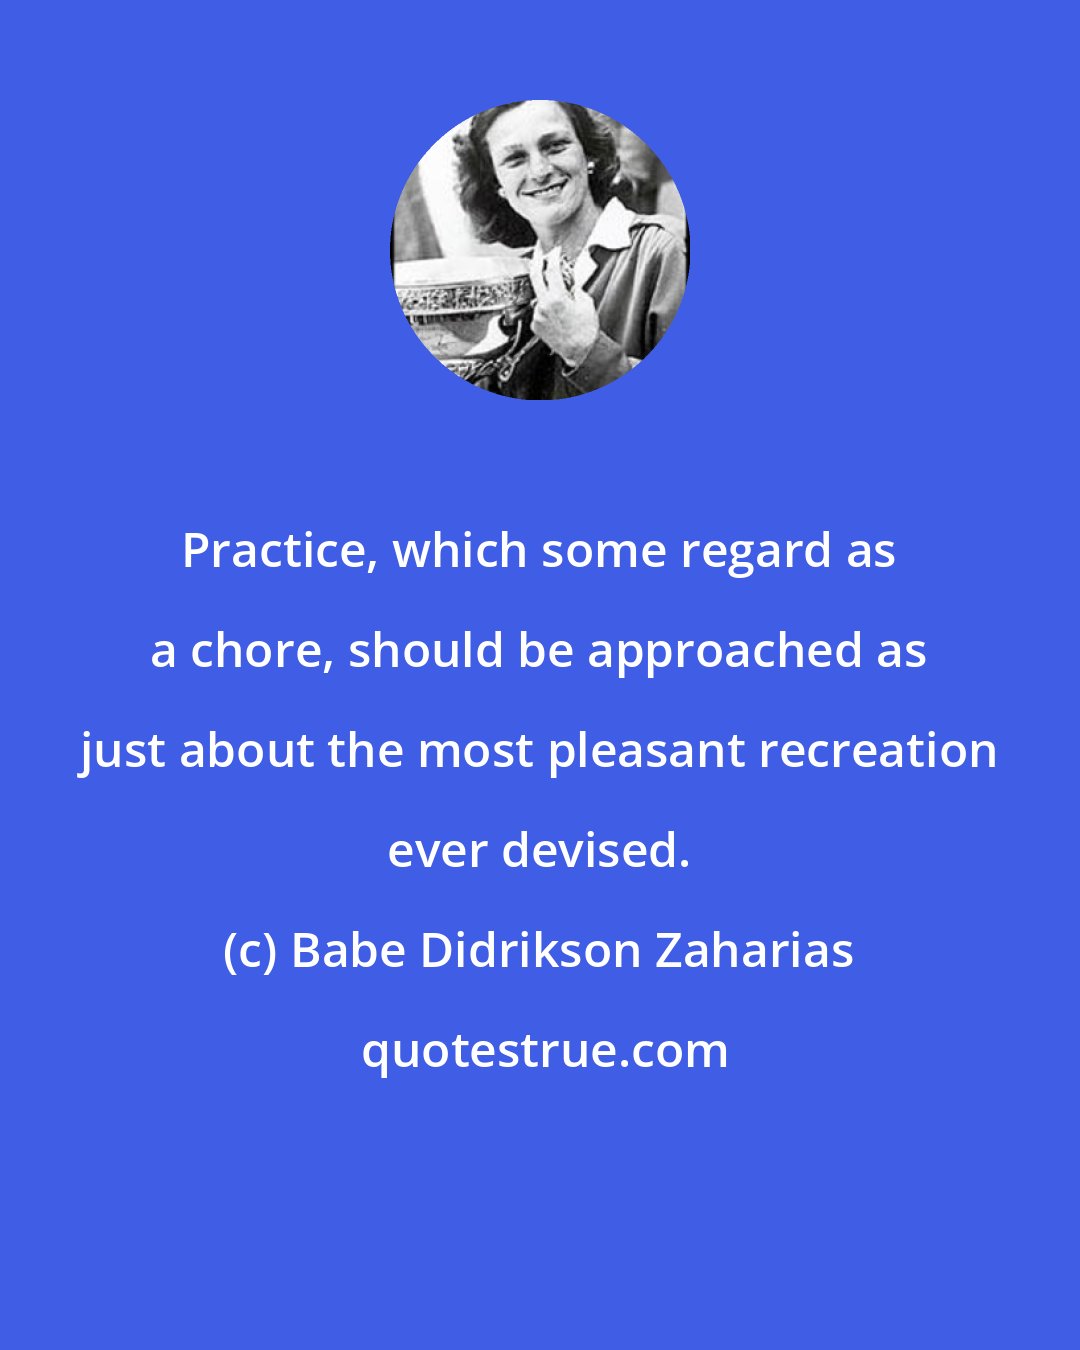 Babe Didrikson Zaharias: Practice, which some regard as a chore, should be approached as just about the most pleasant recreation ever devised.